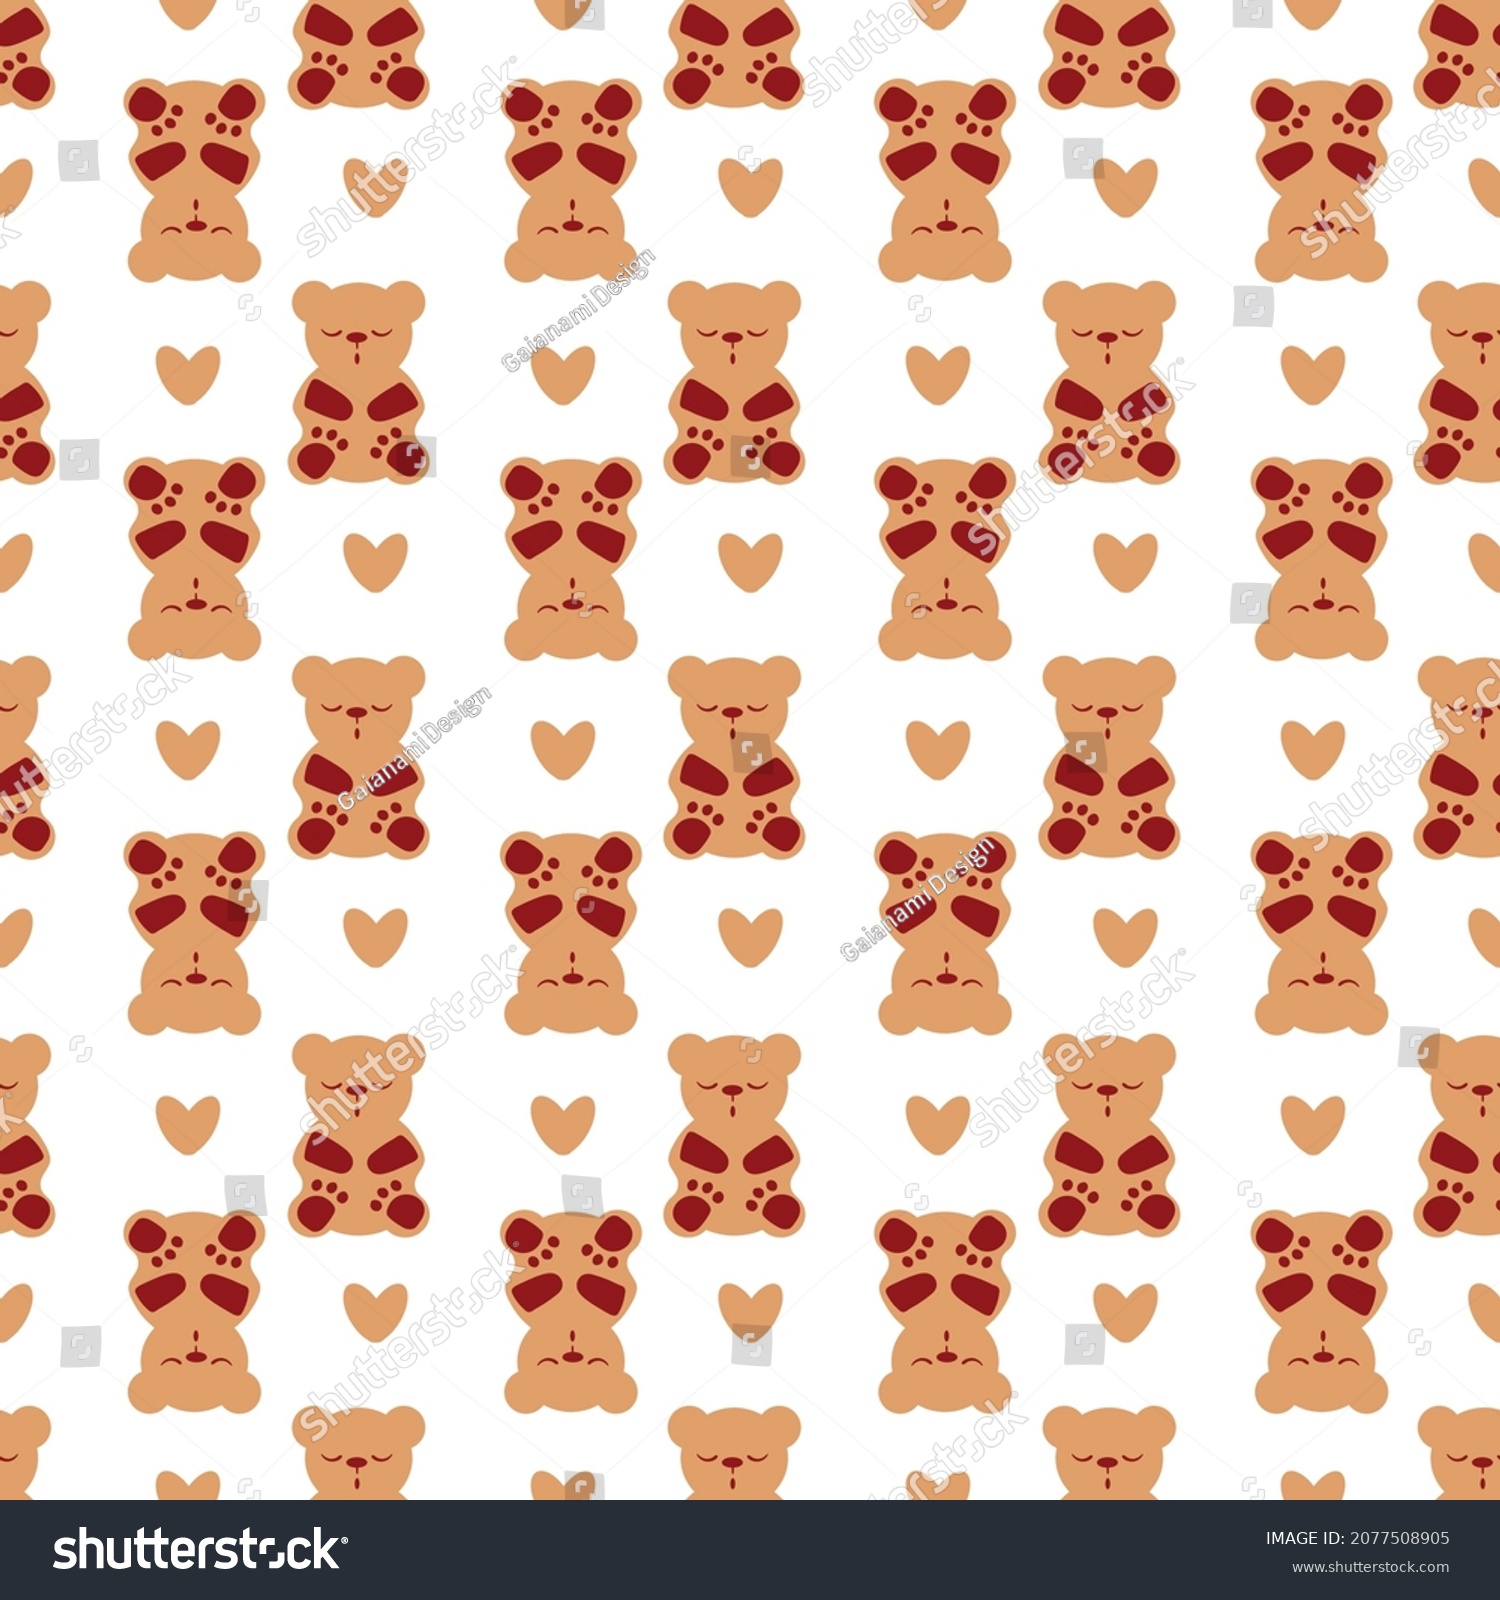 SVG of Sleep gummies and hearts vector seamless pattern background. Backdrop with gummy bears in orange white. Cute kawaii style characters for sleeping well, melatonin natural aid and health concept. svg